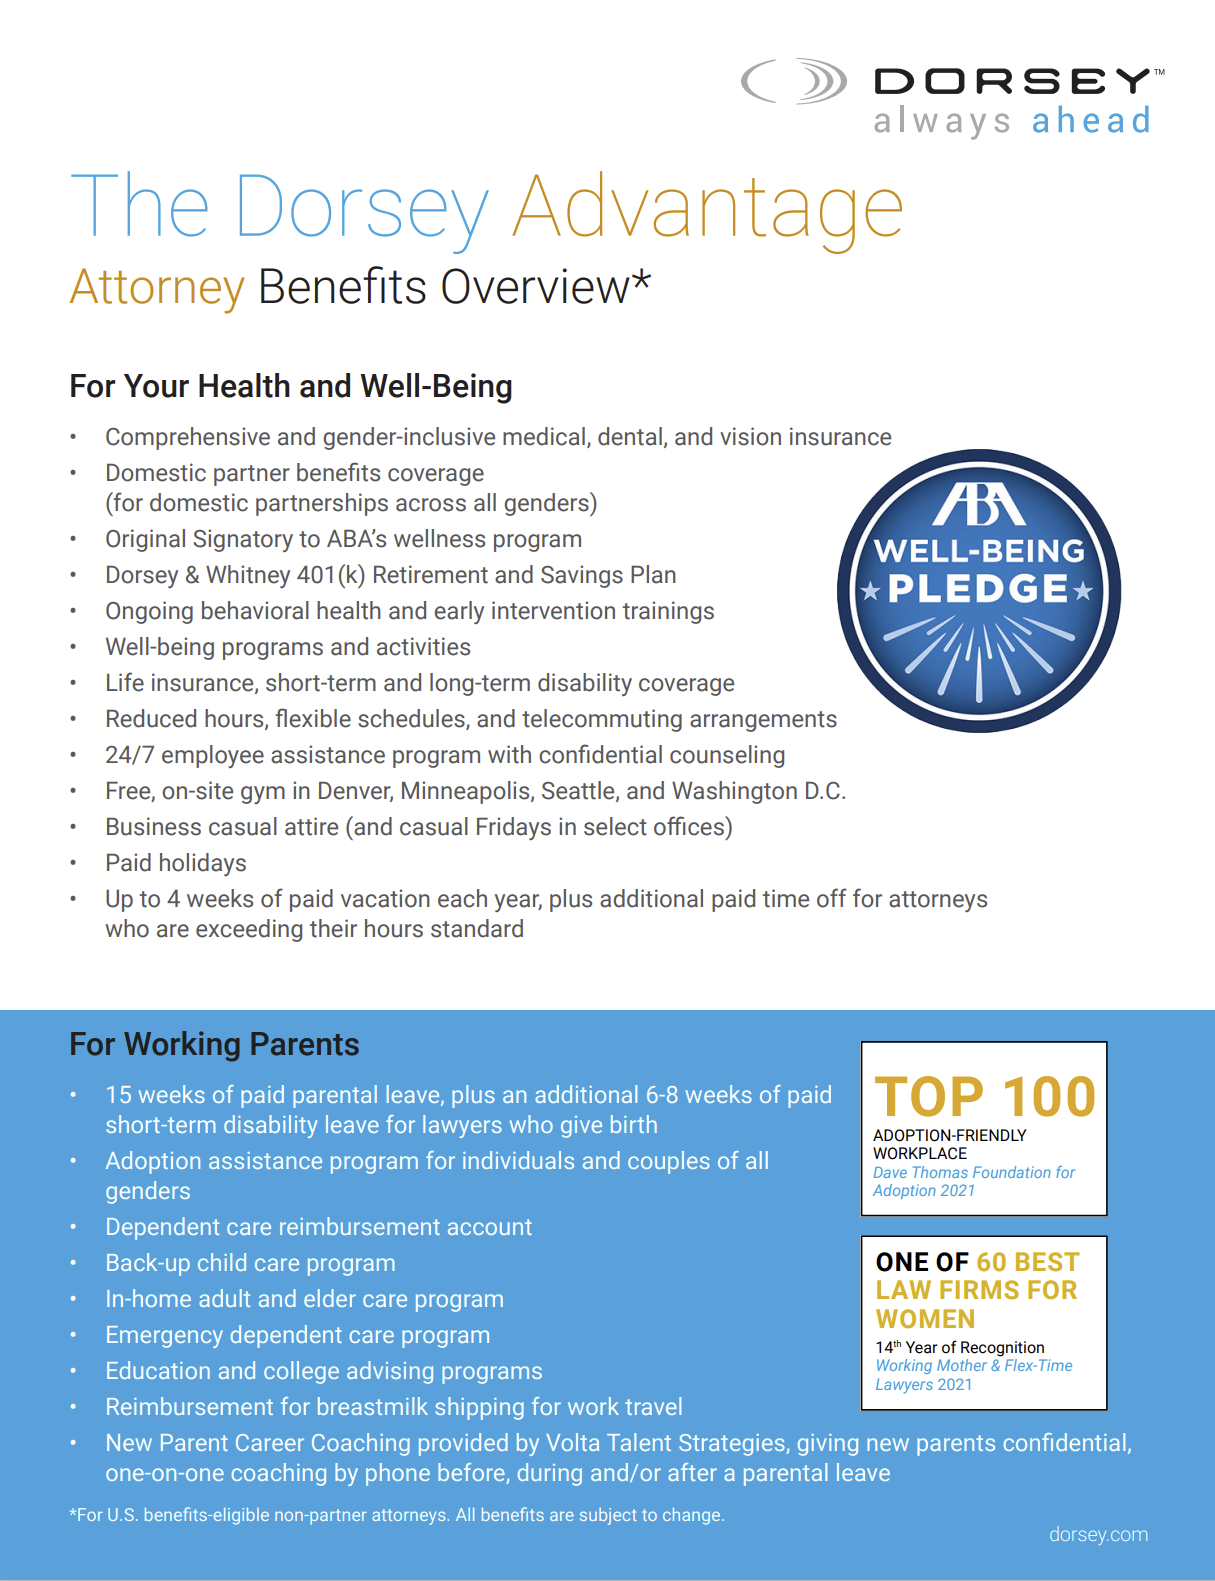 The Dorsey Advantage Attorney Benefits Overview